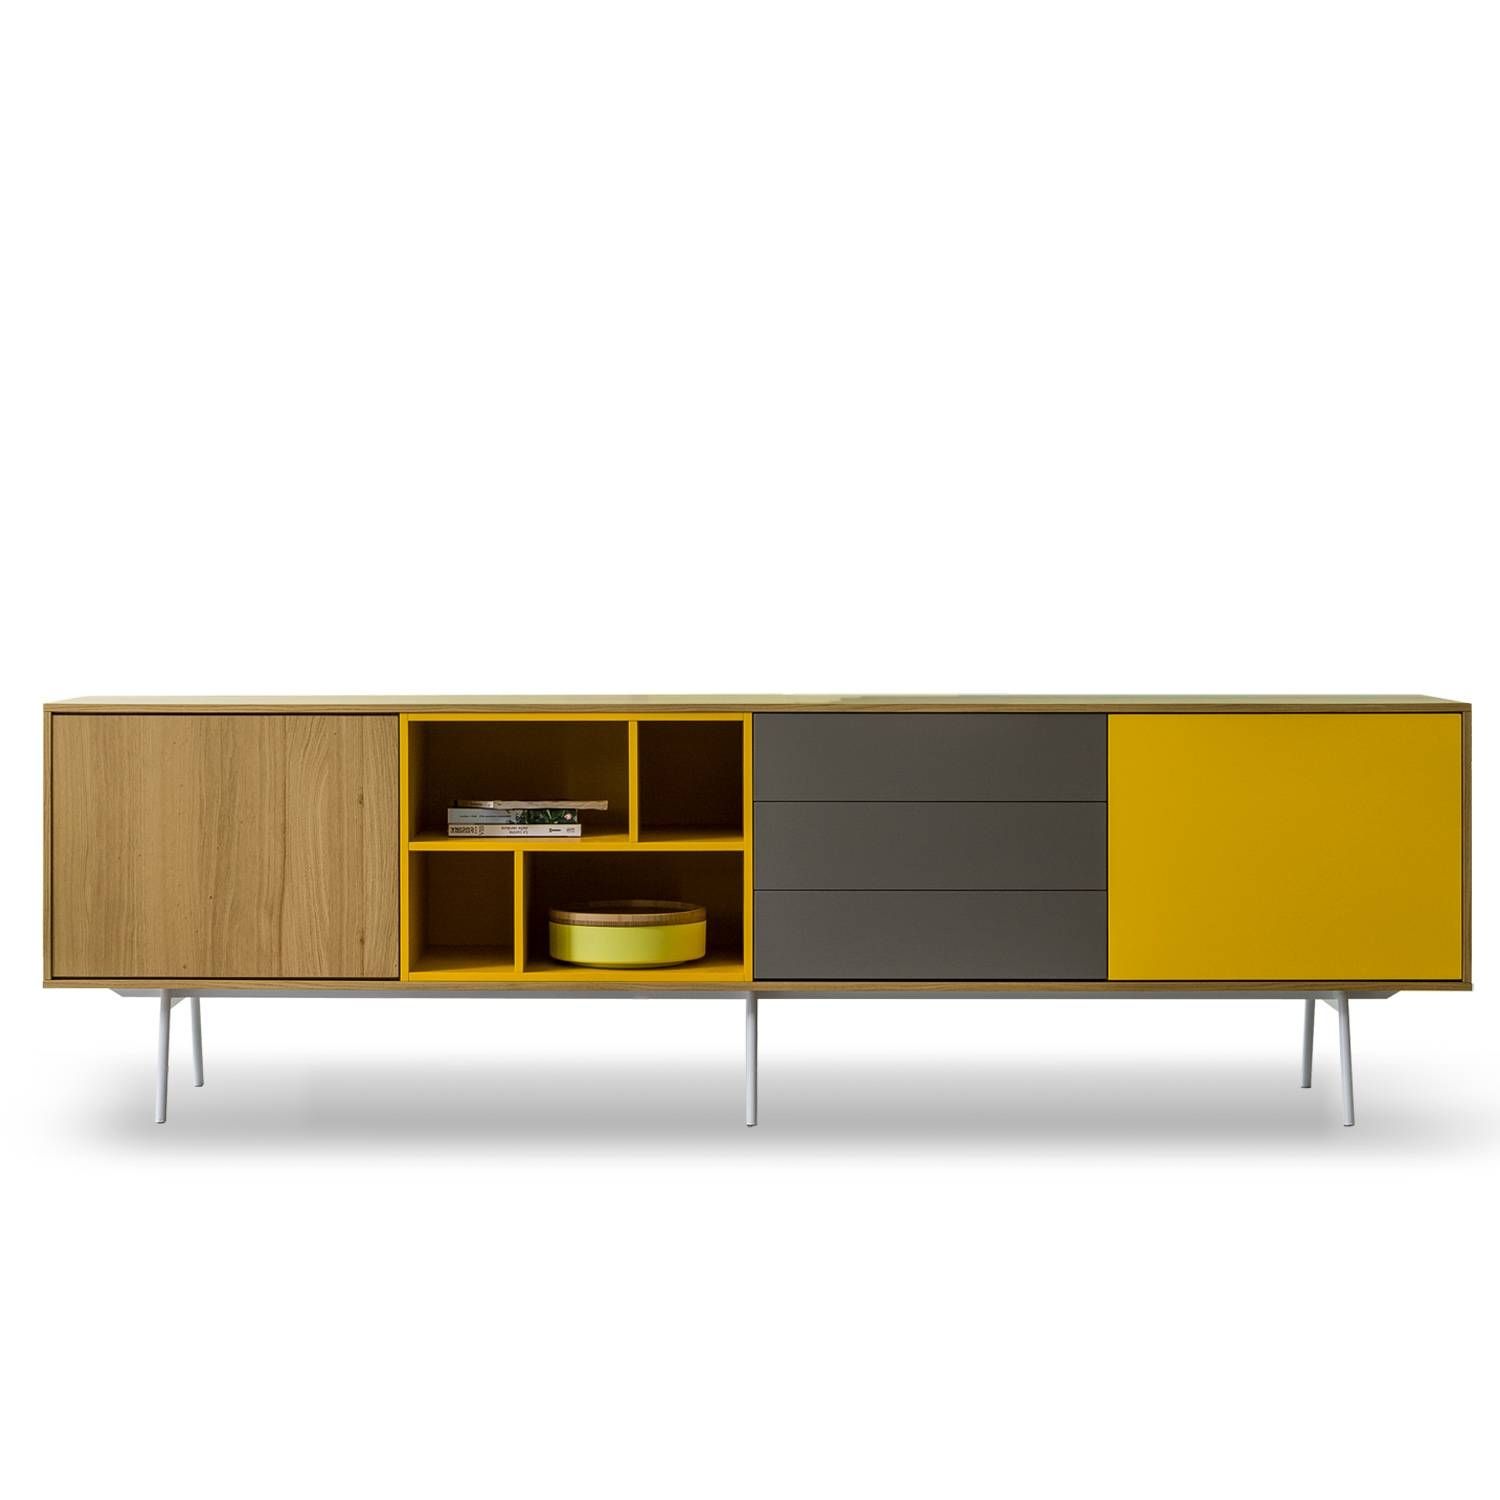 Modern Sideboard | Prince Furniture Pertaining To Contemporary Sideboard (View 20 of 20)